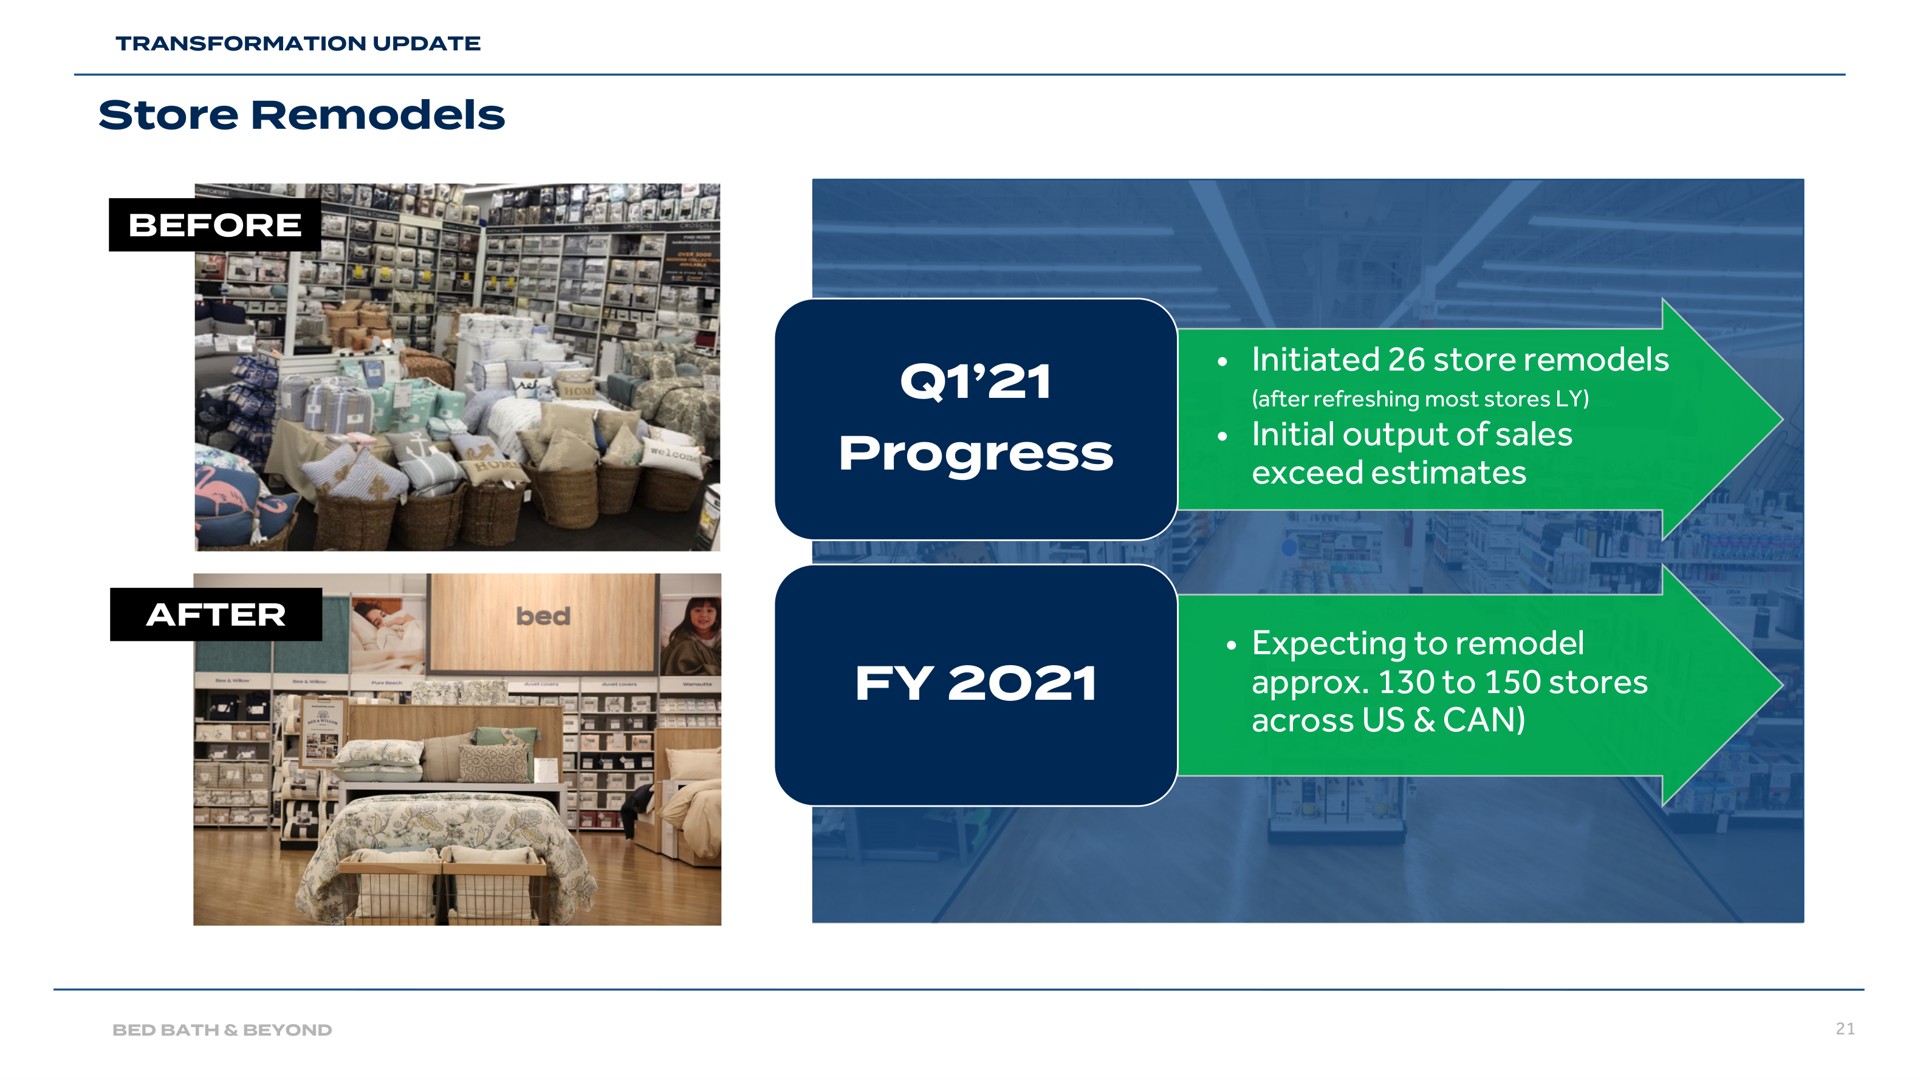 store remodels progress initiated store remodels initial output of sales exceed estimates expecting to remodel to stores across us can | Bed Bath & Beyond